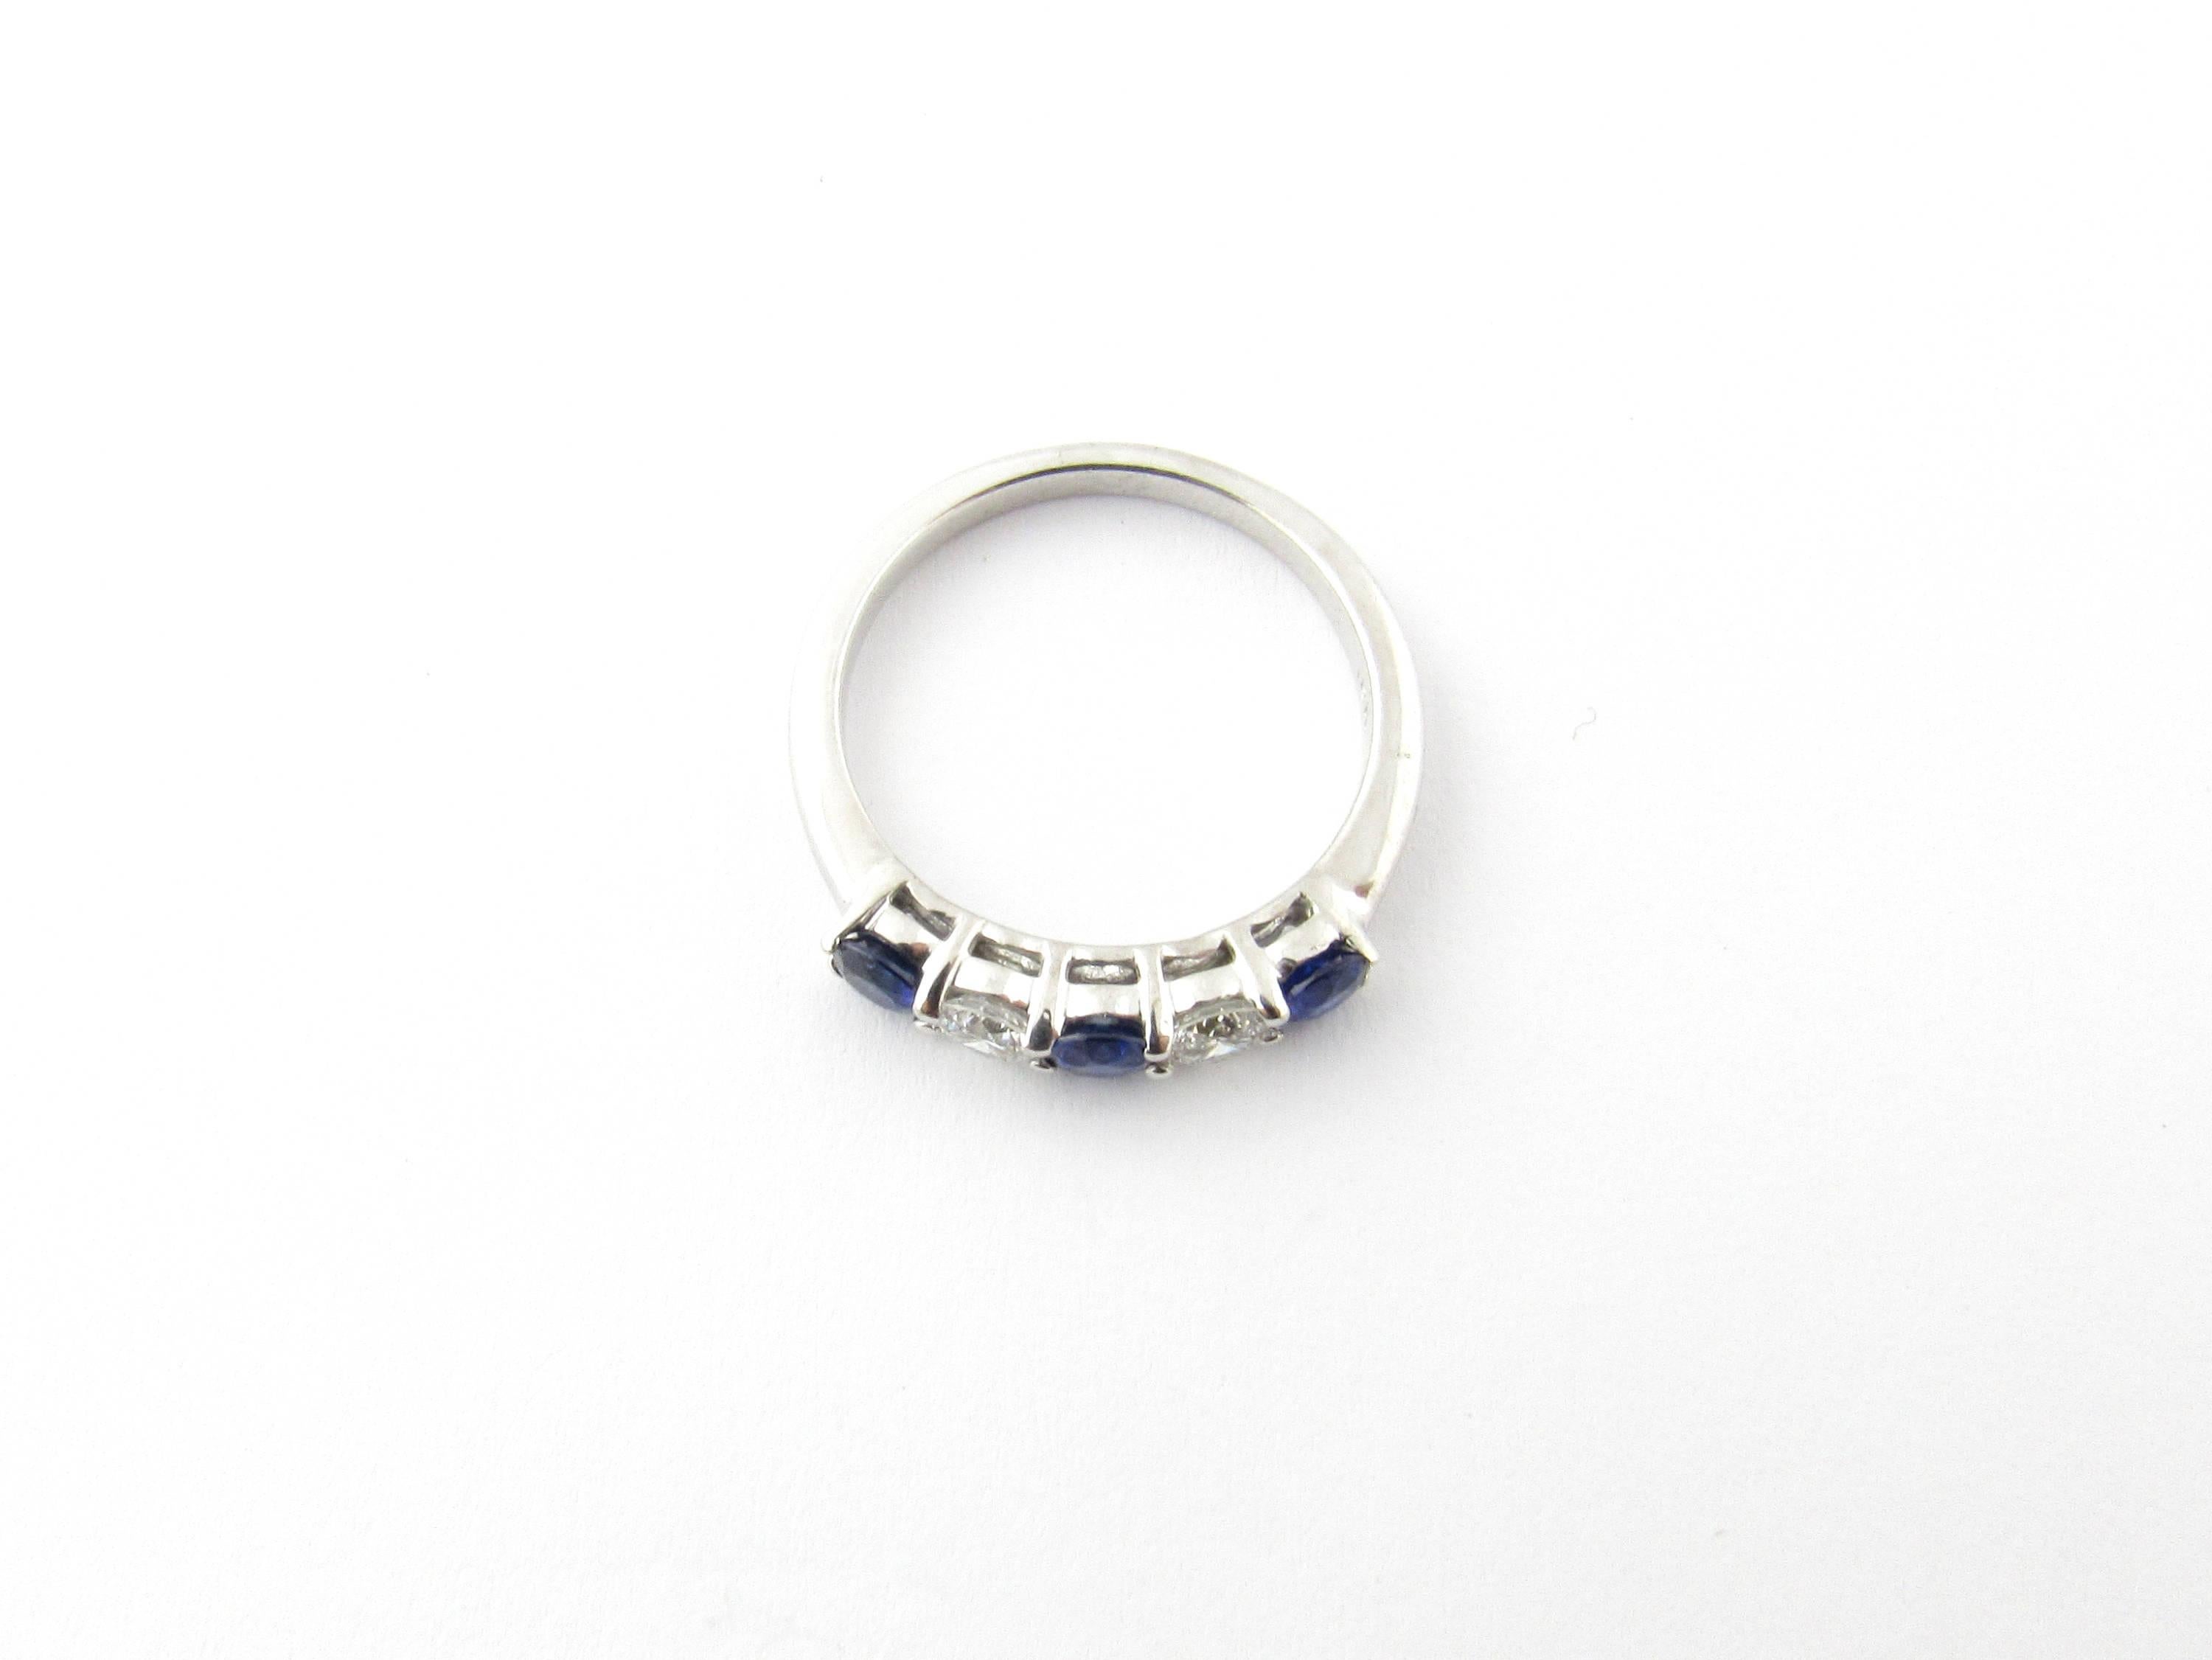 xVintage 18 Karat White Gold Sapphire and Diamond Ring Size 7- 
This sparkling band features three genuine blue sapphires (4 mm each) and two round brilliant cut diamonds (.20 ct. each) set in 18K white gold. Shank measures 2 mm. 
Approximate total